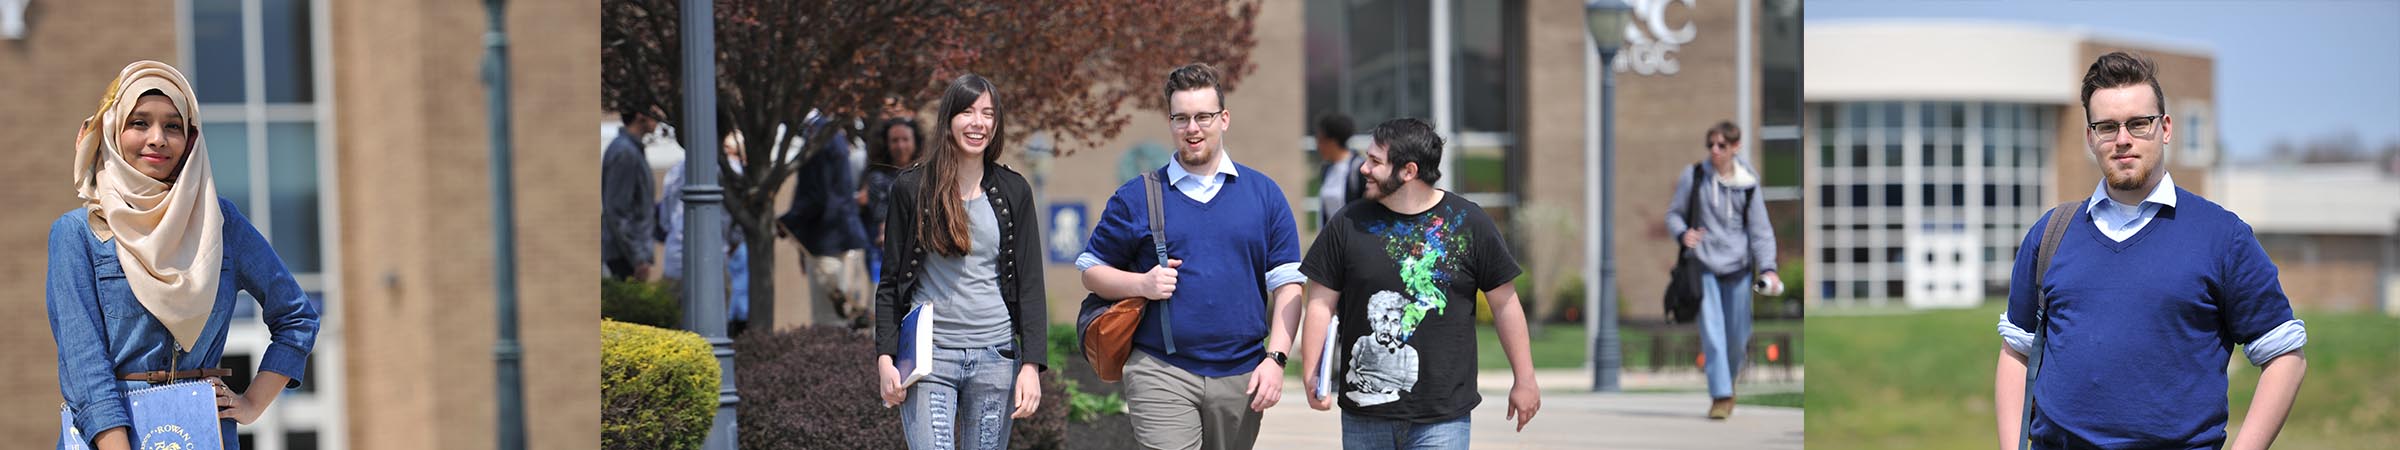 Rowan College students outside on campus